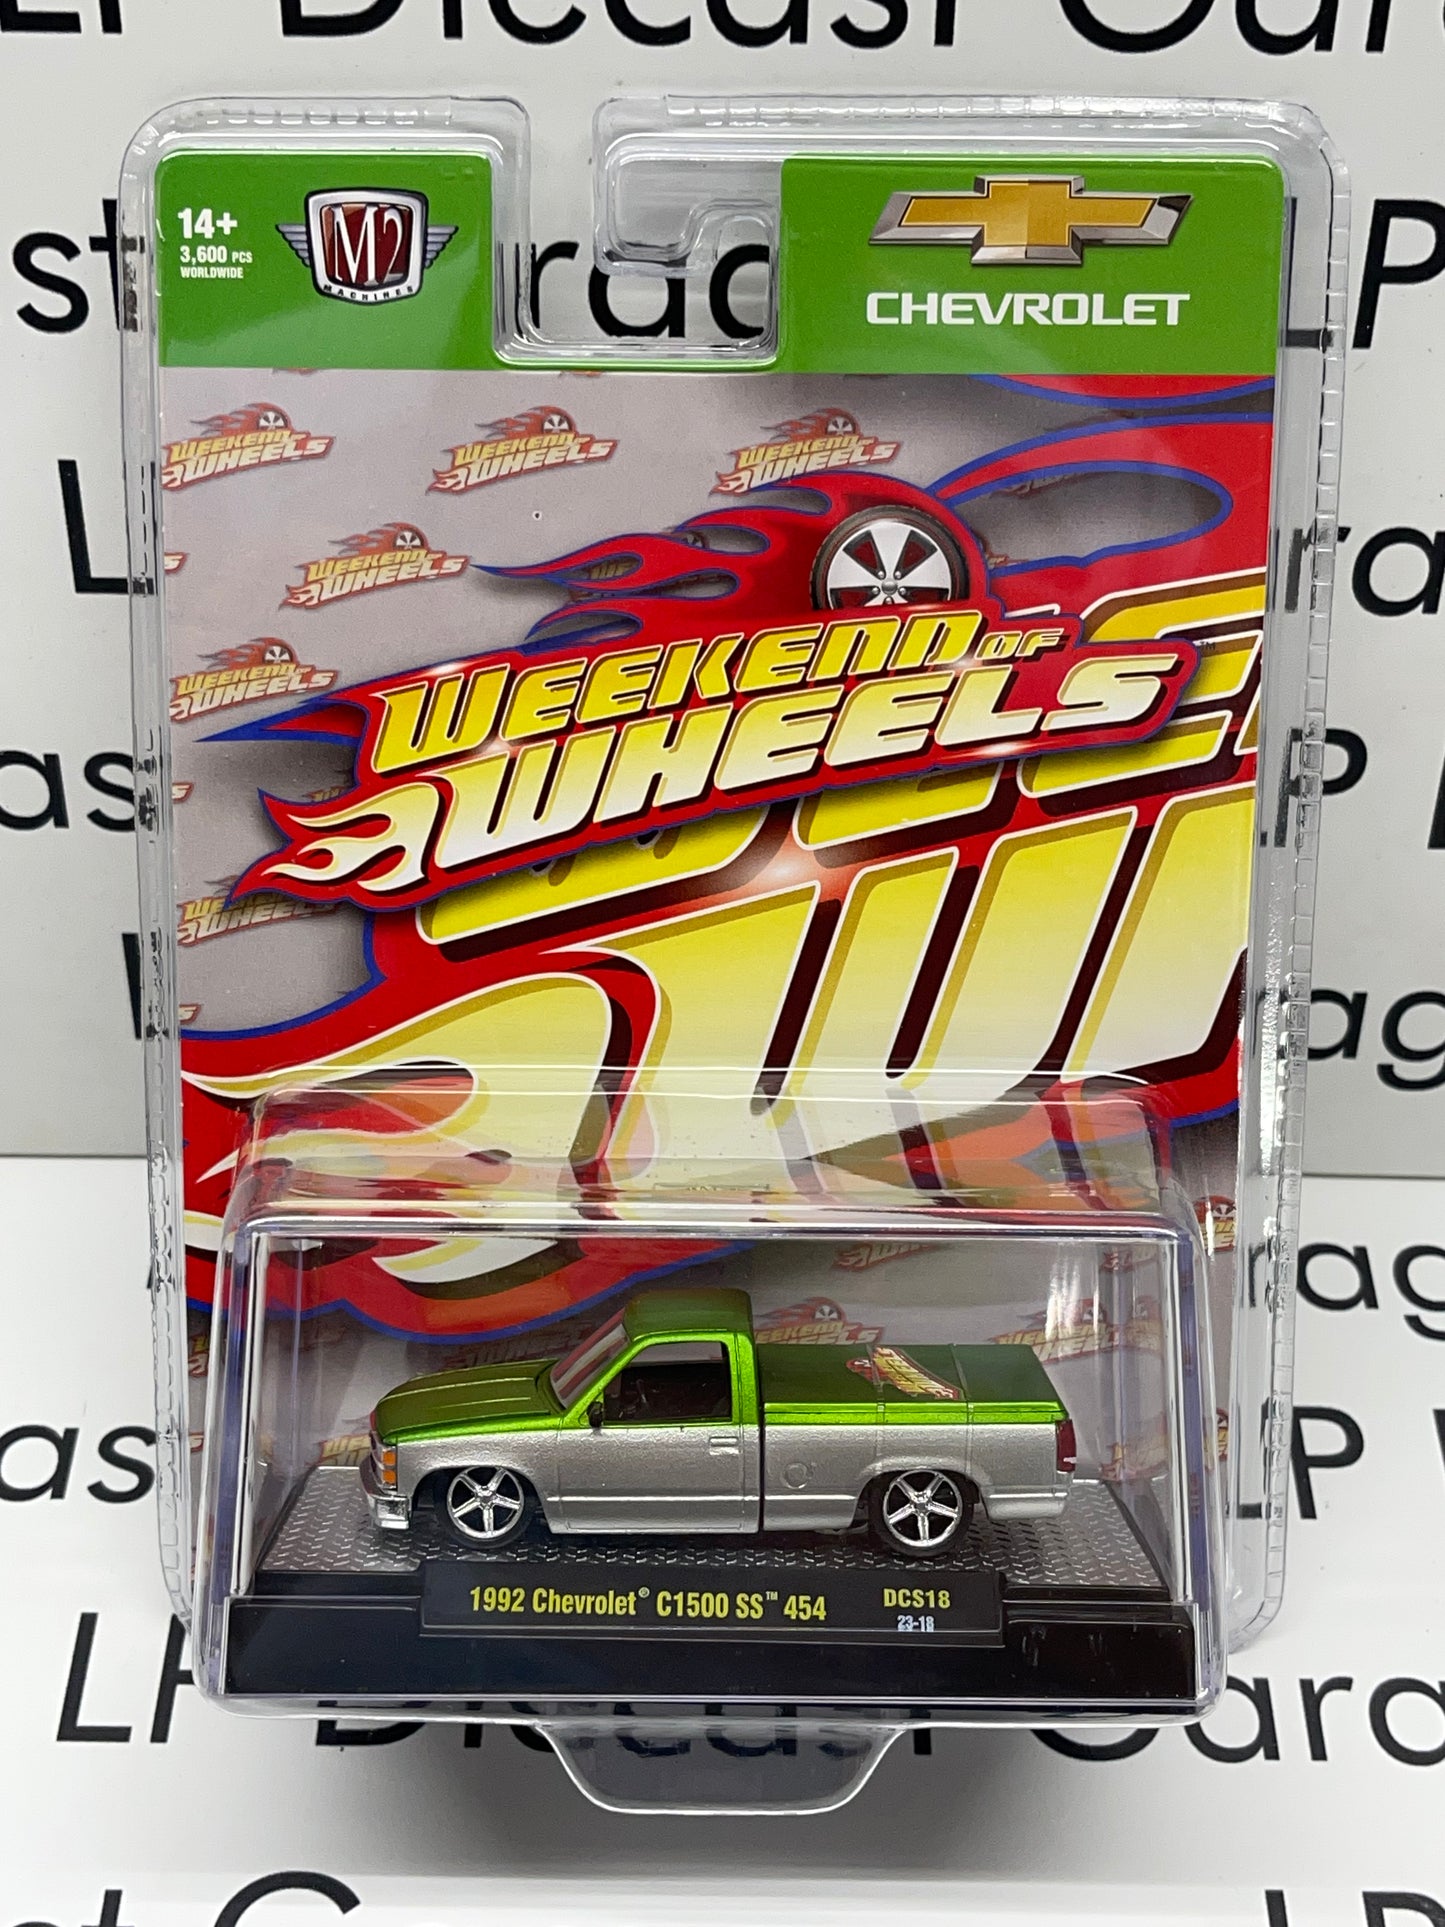 M2 Machines Weekend of Wheels 1992 Chevrolet C1500 SS 454 Green & Silver Exclusive 3600pcs Made 1:64 Diecast